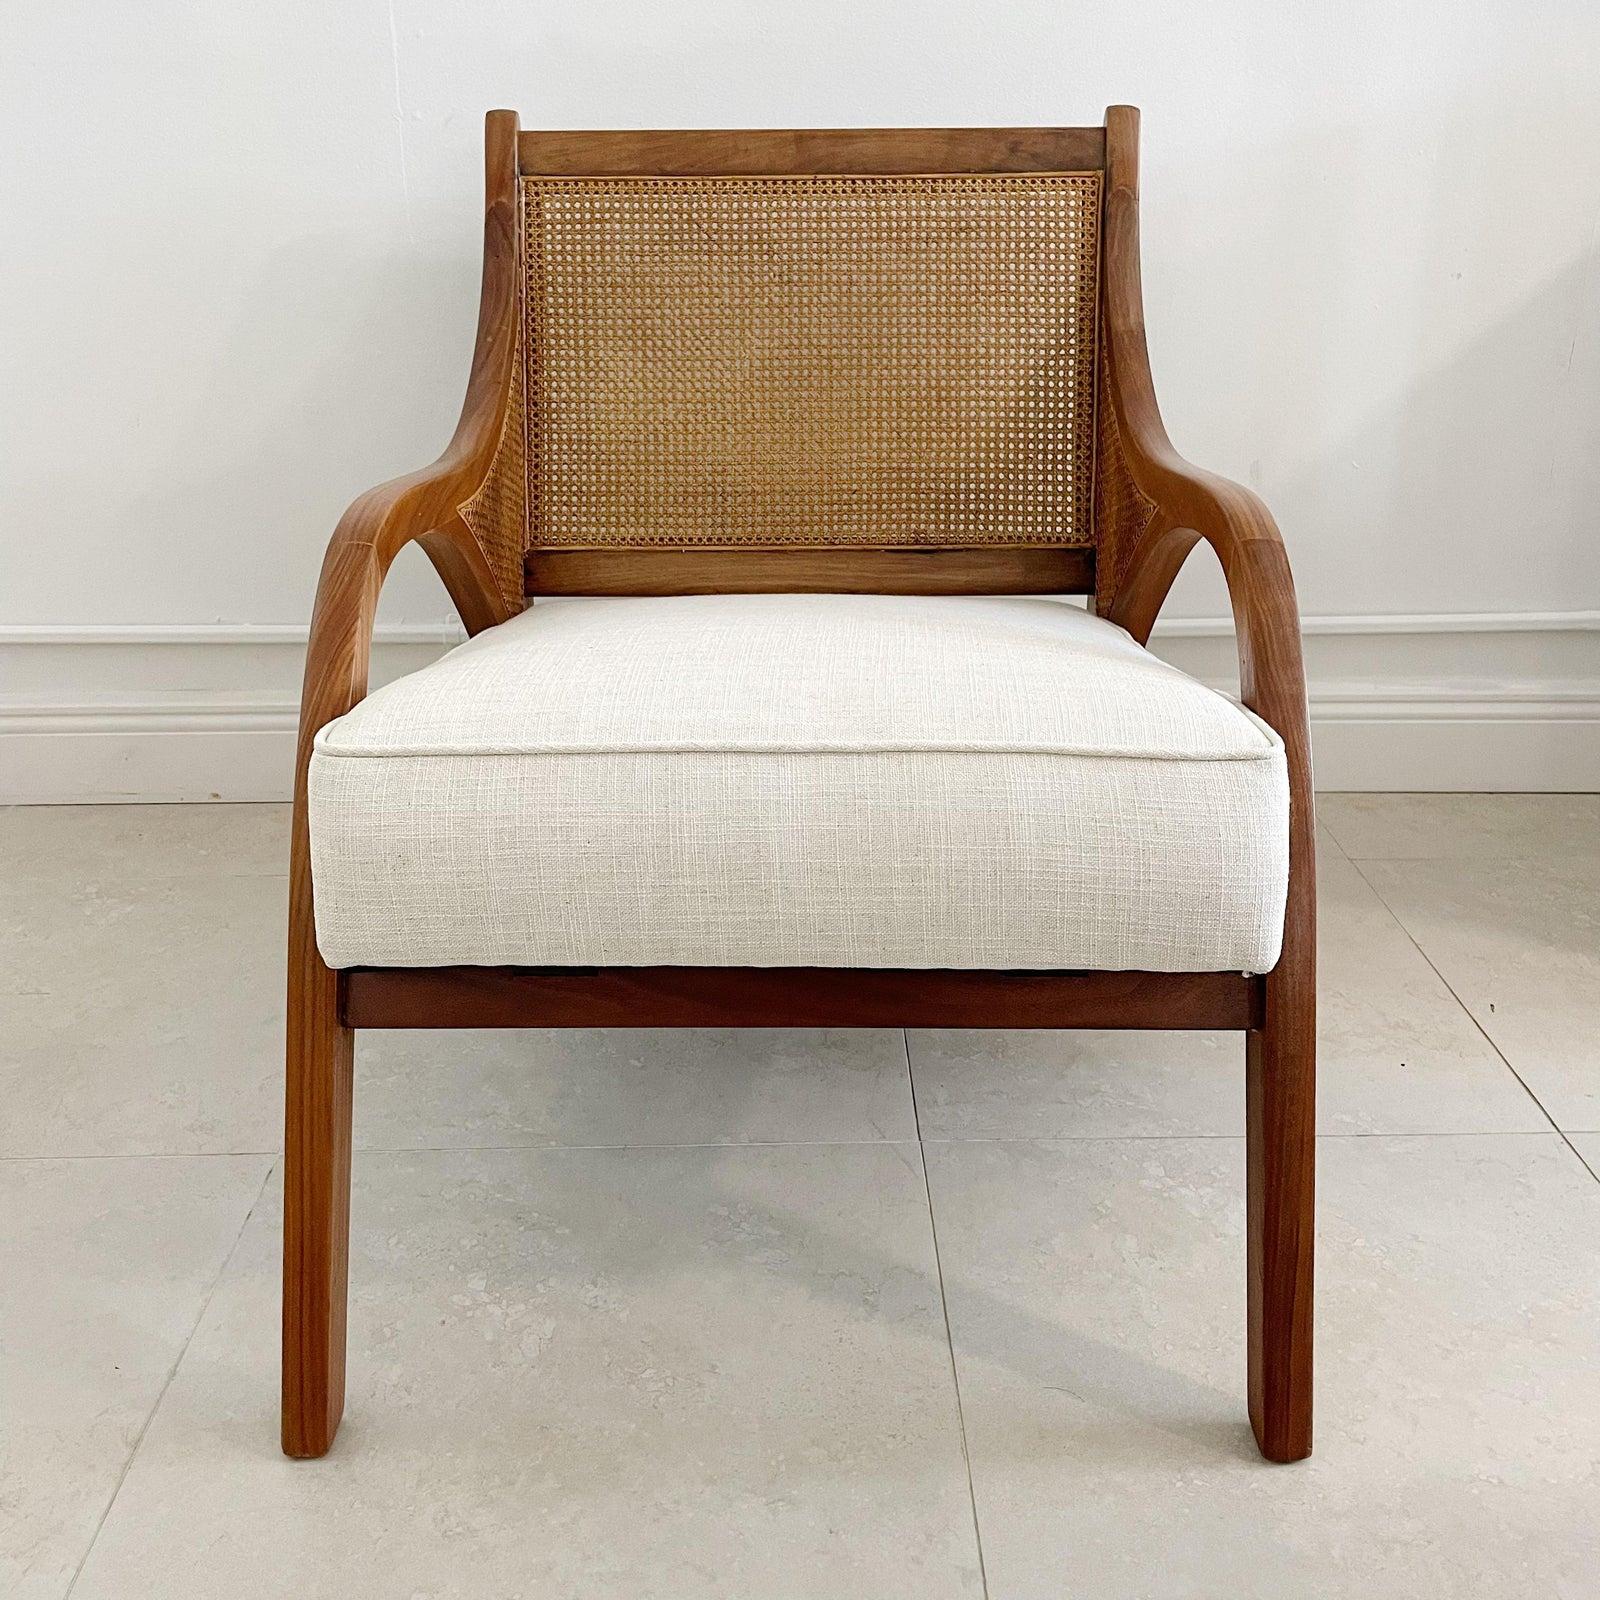 Pair of lounge chairs in teak wood with cane inserts on sides and back. Newly upholstered in off white fabric.